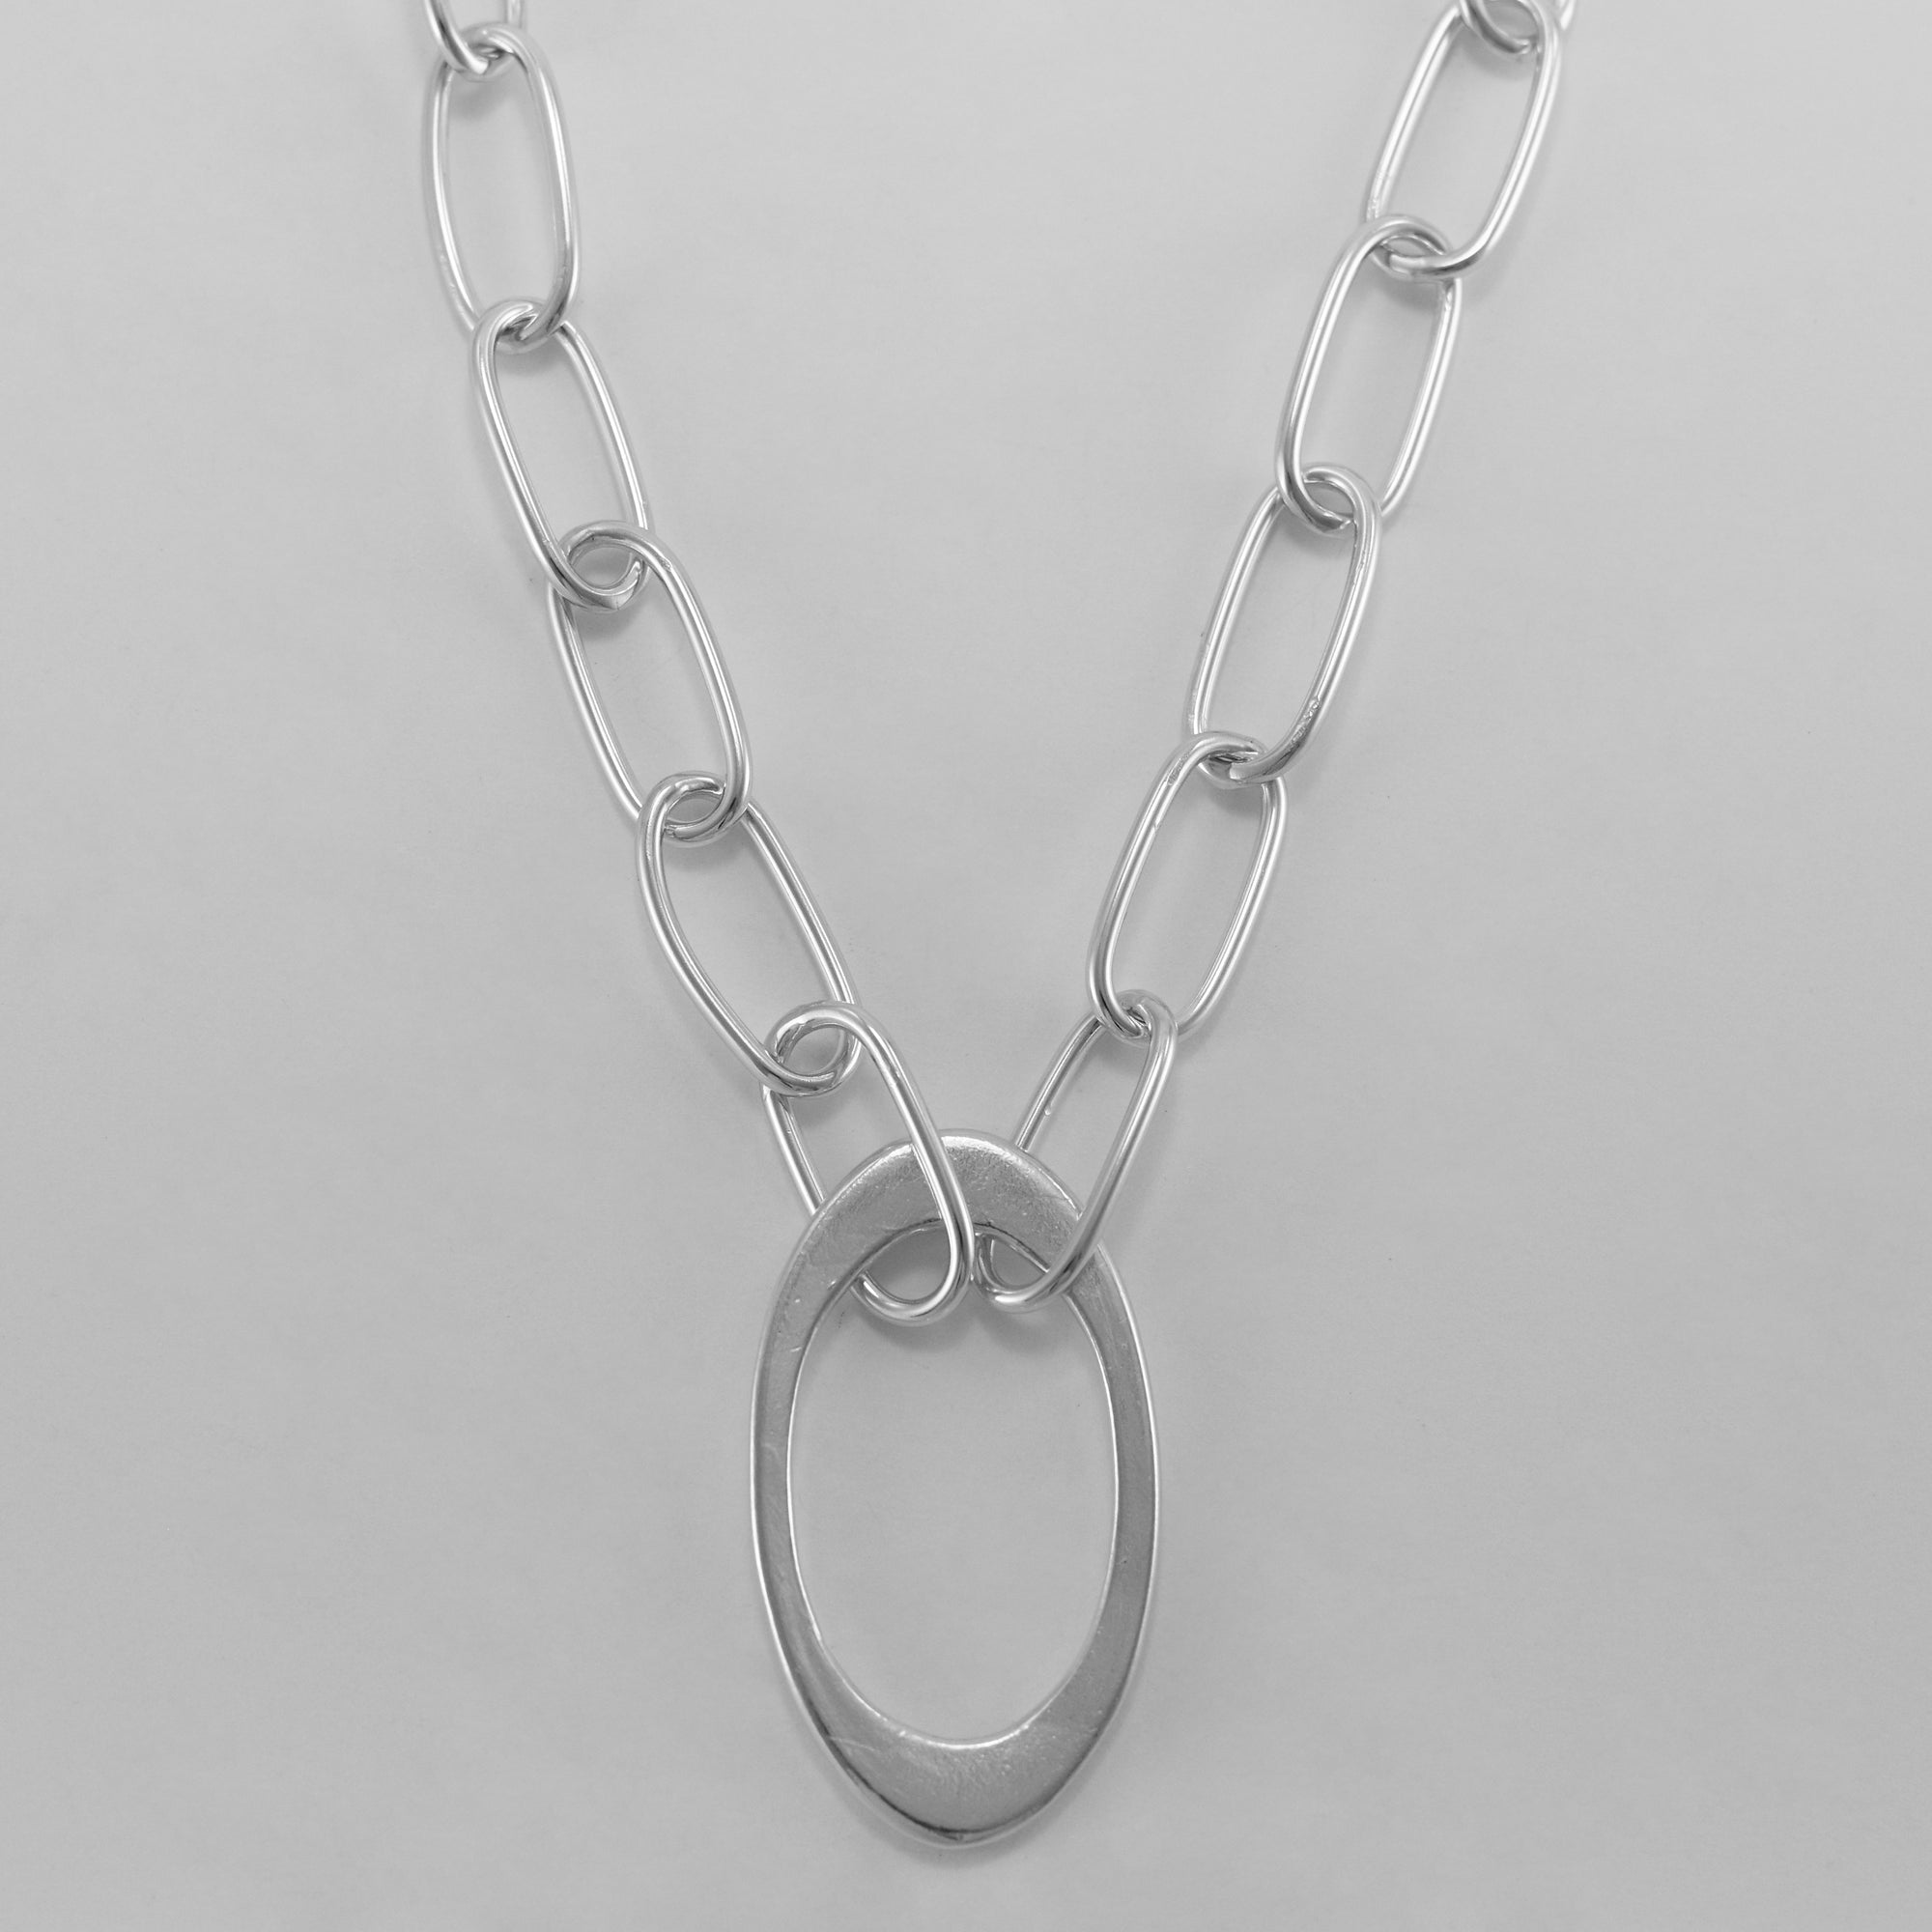 An up close image of the fiona necklace with the central cast oval and handcrafted chain around the collar.